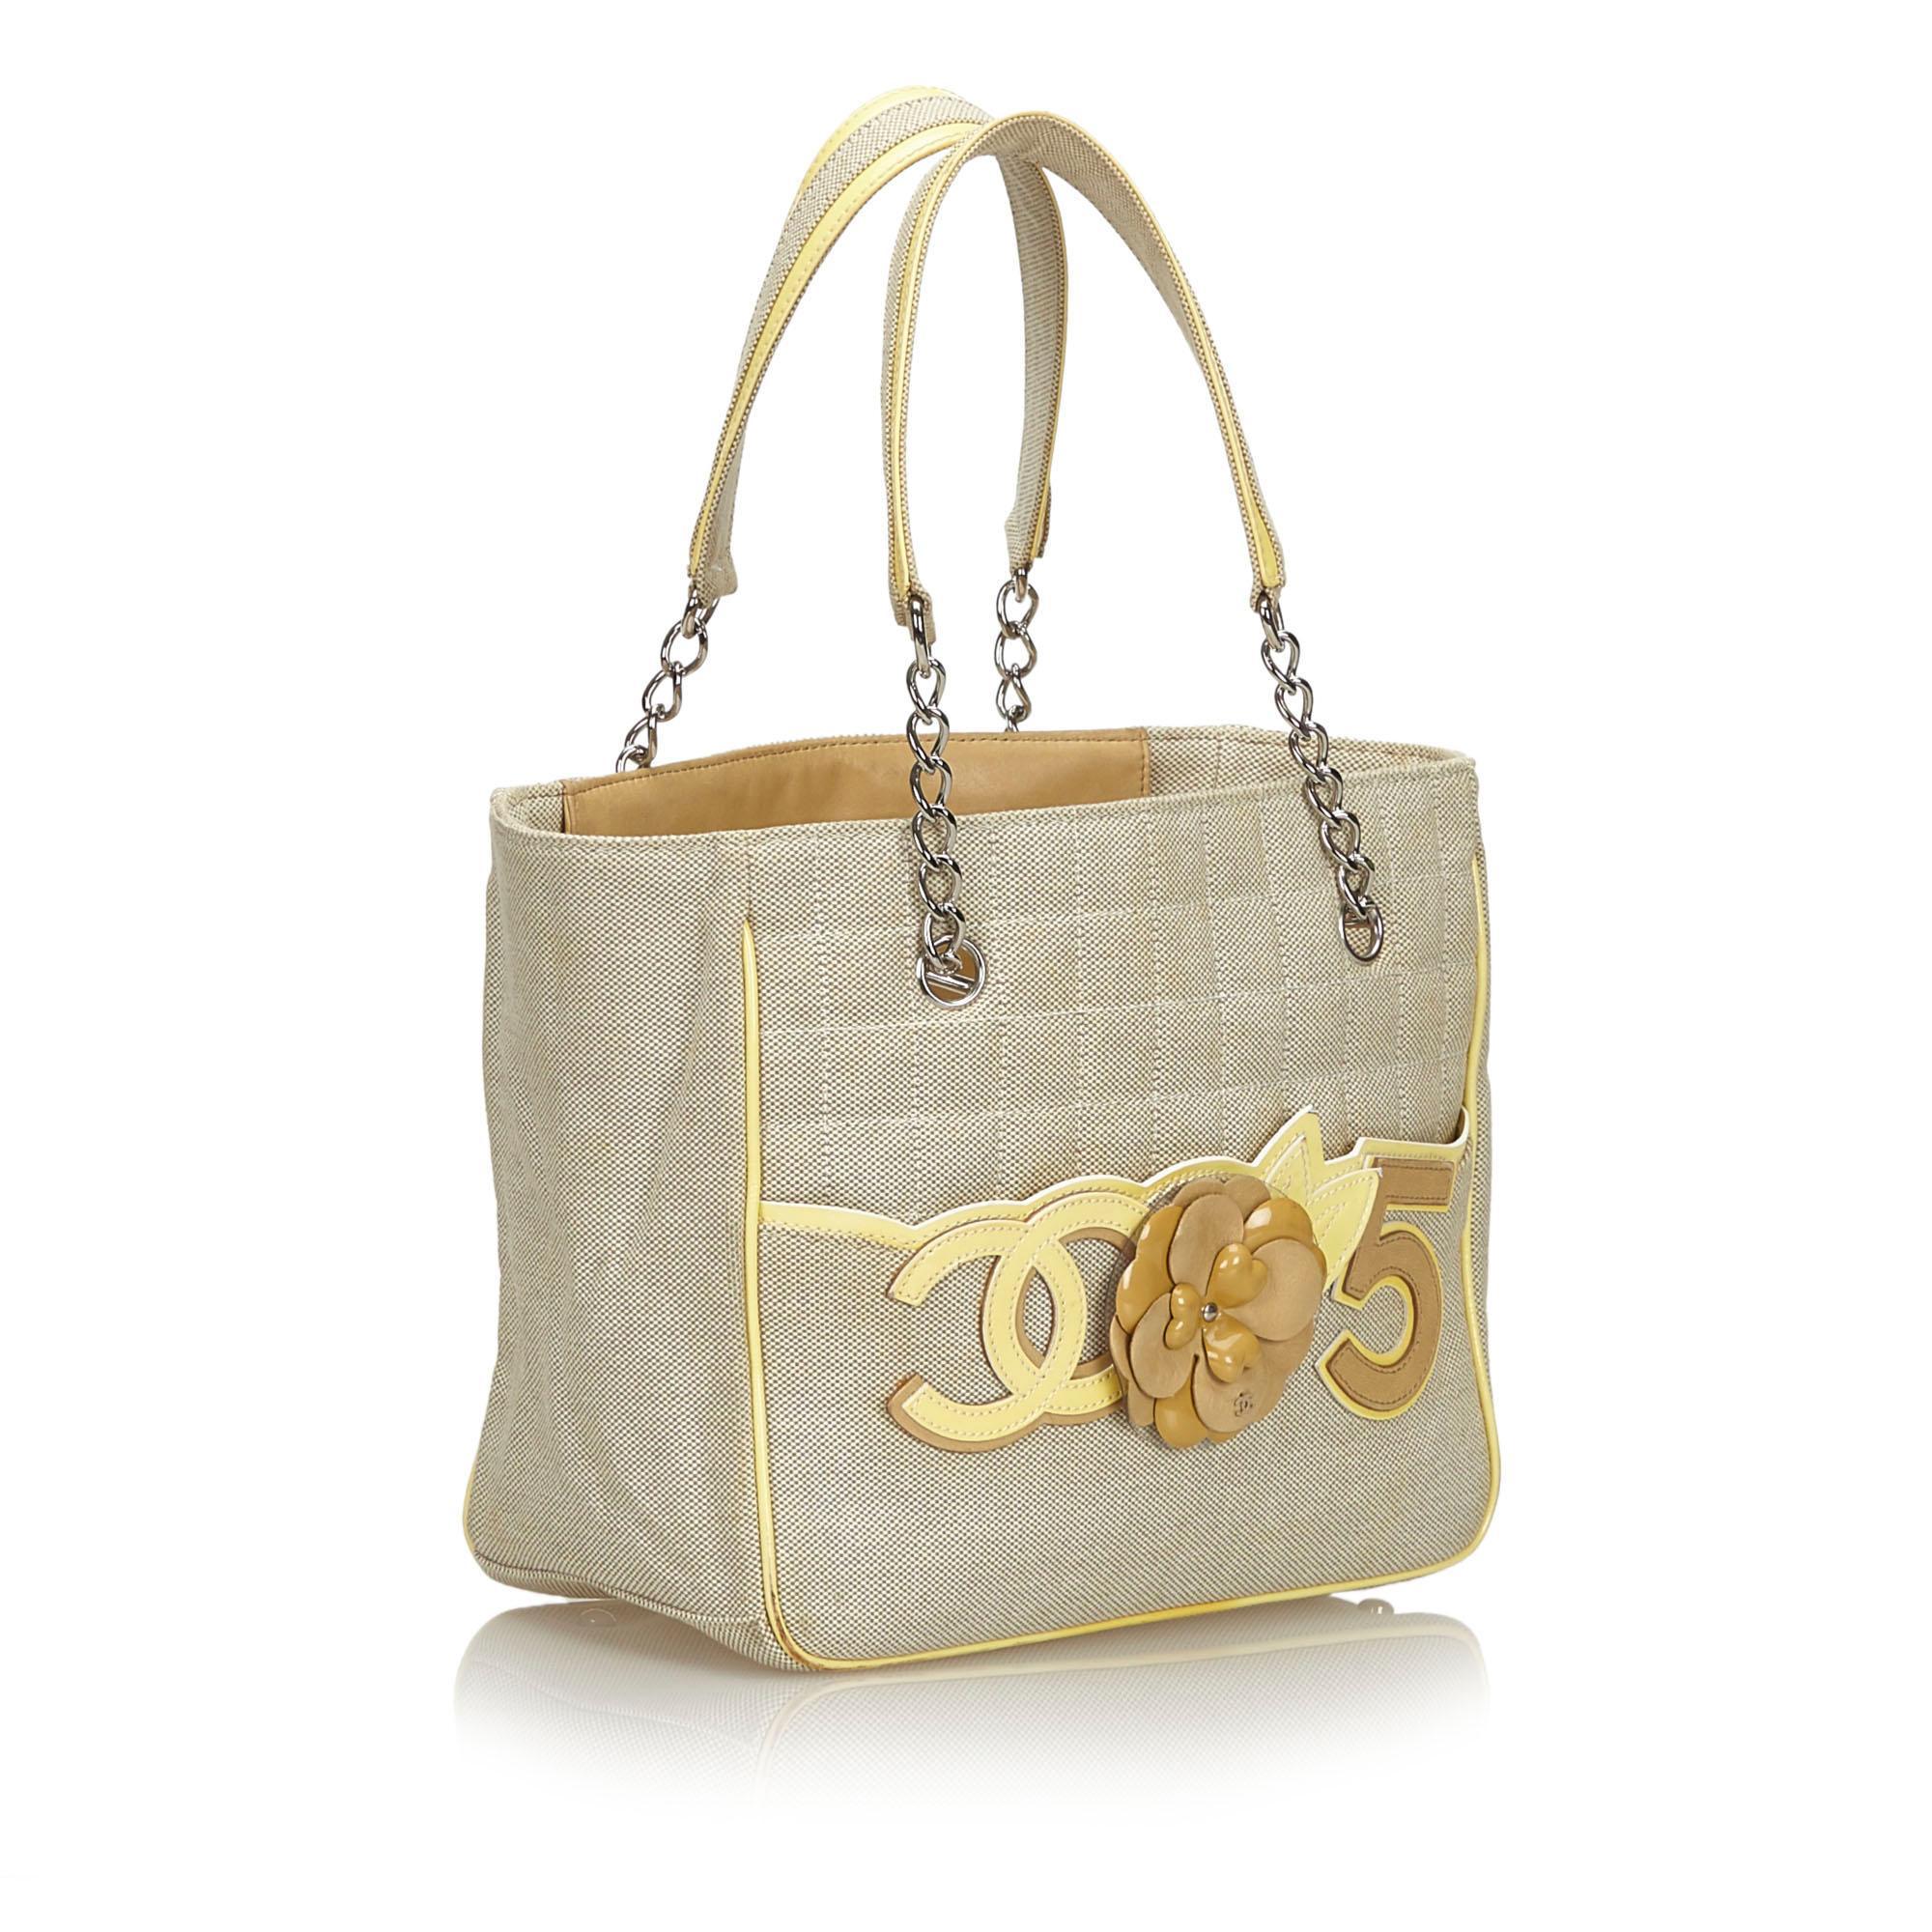 Chanel 2006 Vintage Beige Camelia Flower Canvas Satchel Shopping Tote Bag In Good Condition For Sale In Miami, FL